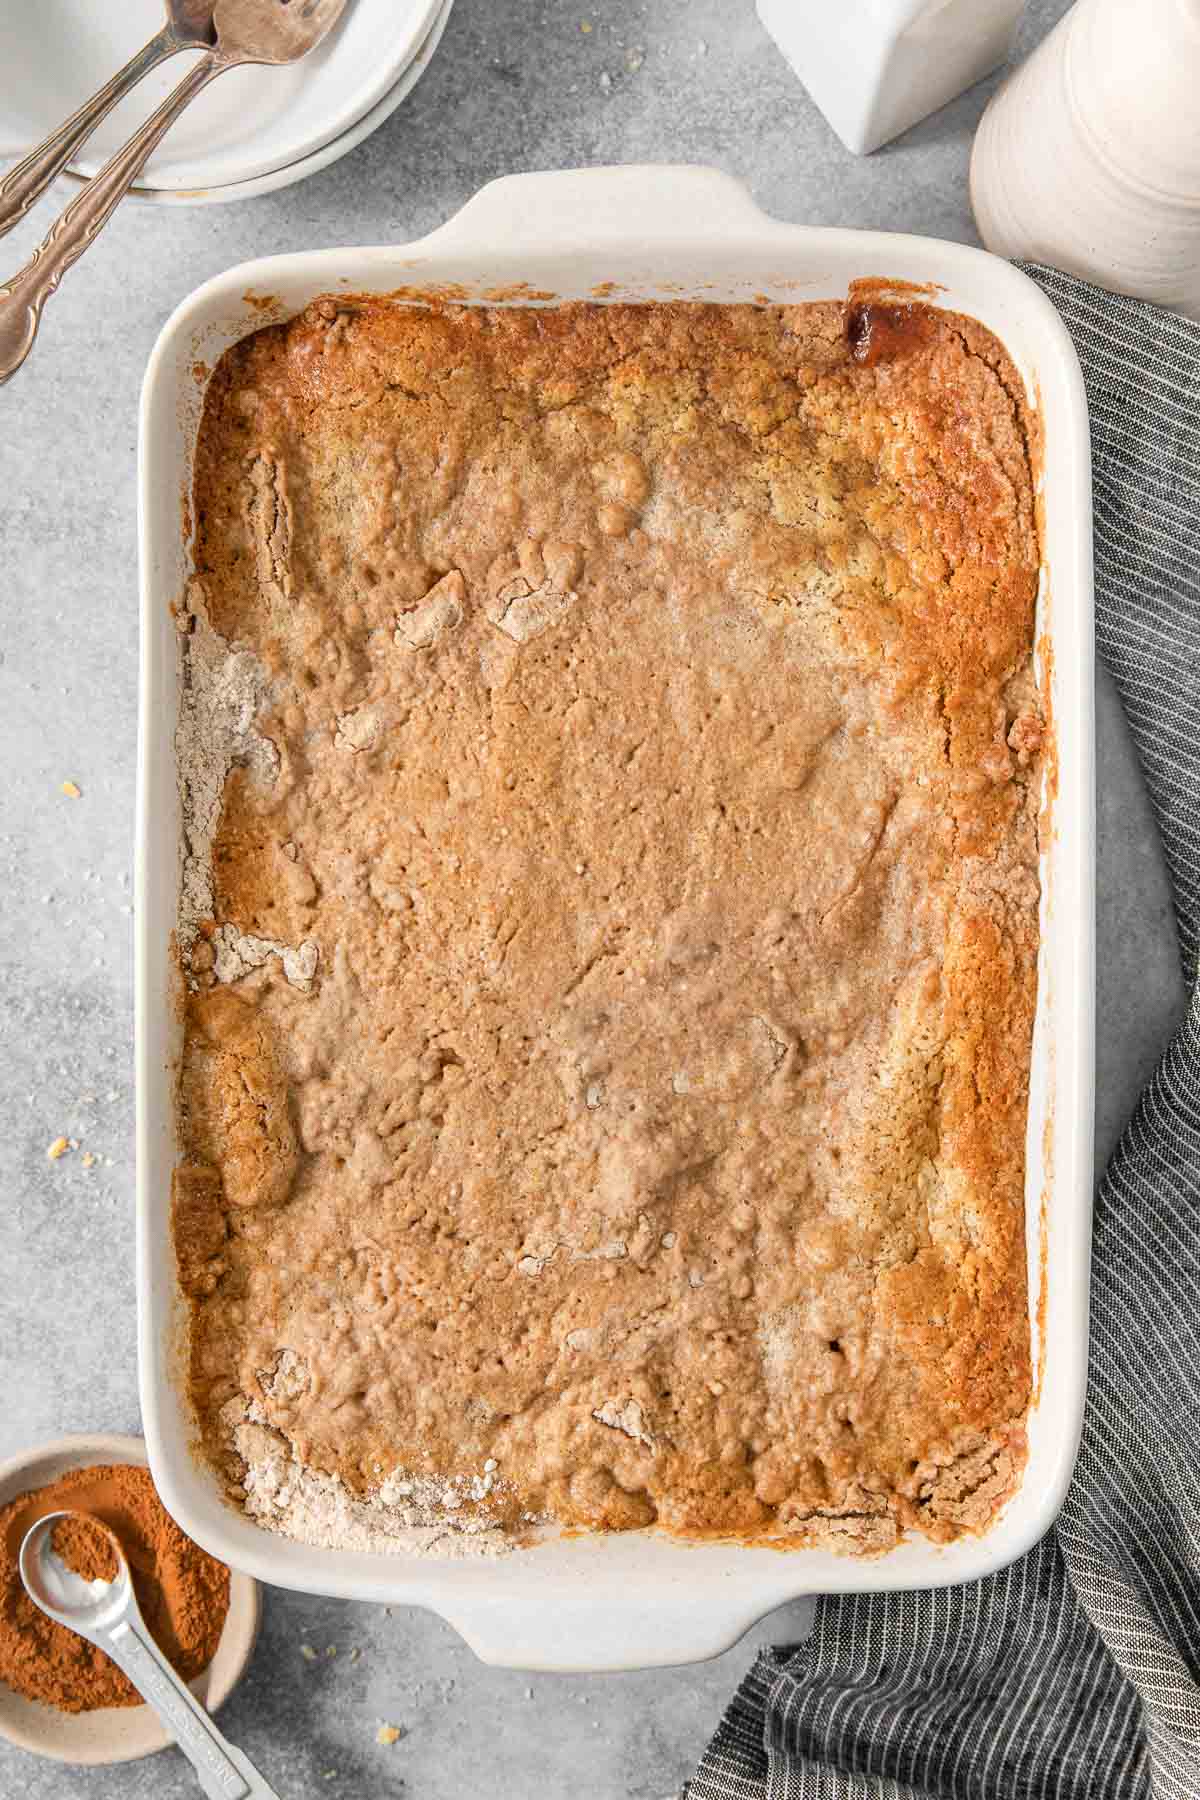 A rectangle baking dish with an apple dump cake baked in it.